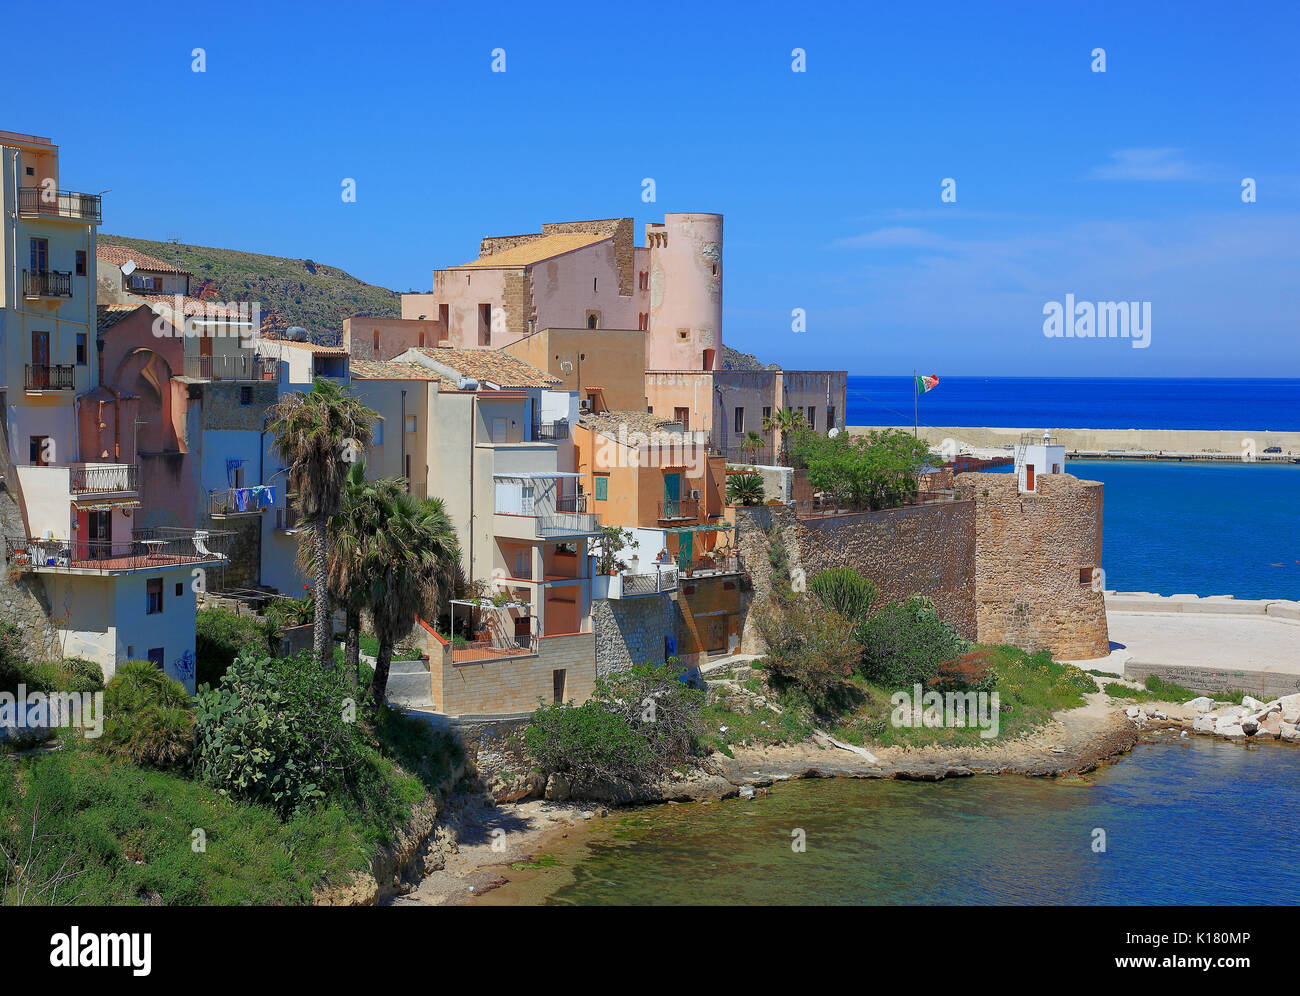 Sicily, Castellammare del Golfo, municipality in the province of Trapani, view of the castle from the 14th century by the sea Stock Photo